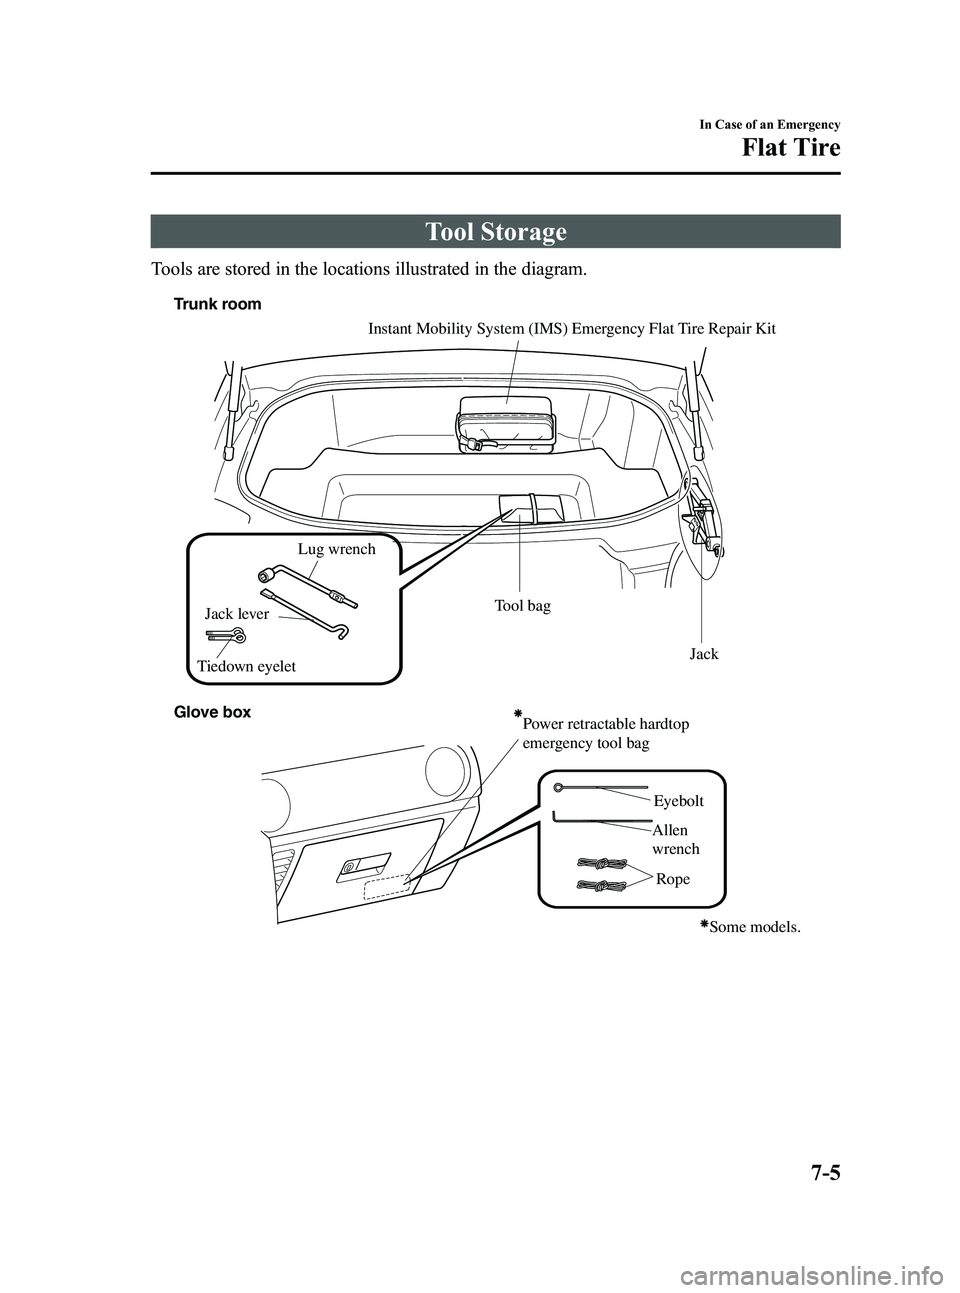 MAZDA MODEL MX-5 MIATA PRHT 2013  Owners Manual Black plate (303,1)
Tool Storage
Tools are stored in the locations illustrated in the diagram.
Power retractable hardtop 
emergency tool bag
Tool bagGlove box Lug wrench
Jack
Jack lever
Instant Mobili